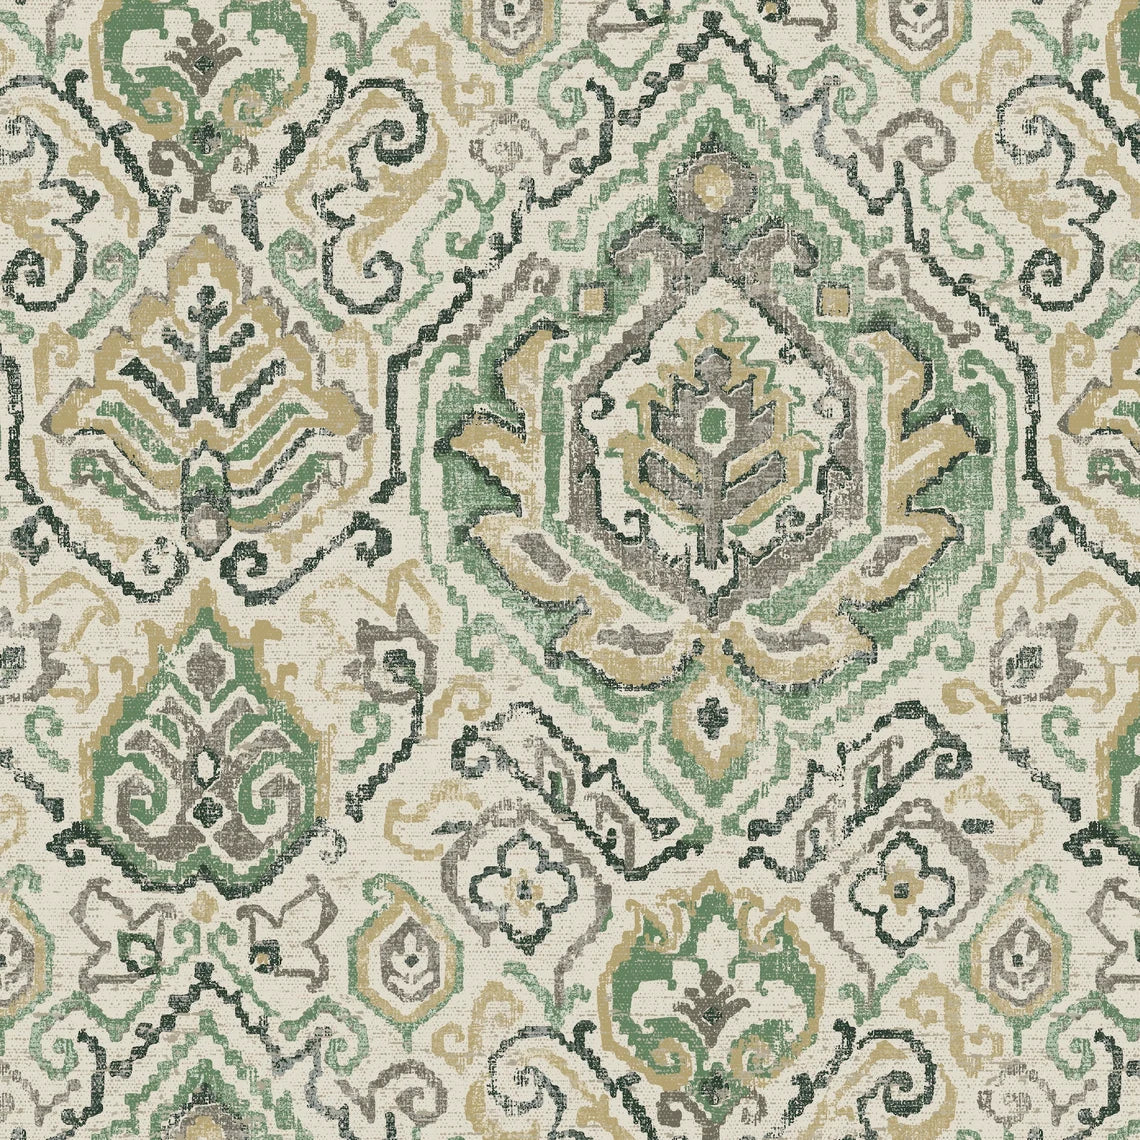 Tailored Bedskirt in Cathell Meadow Green Medallion Weathered Persian Rug Design- Large Scale